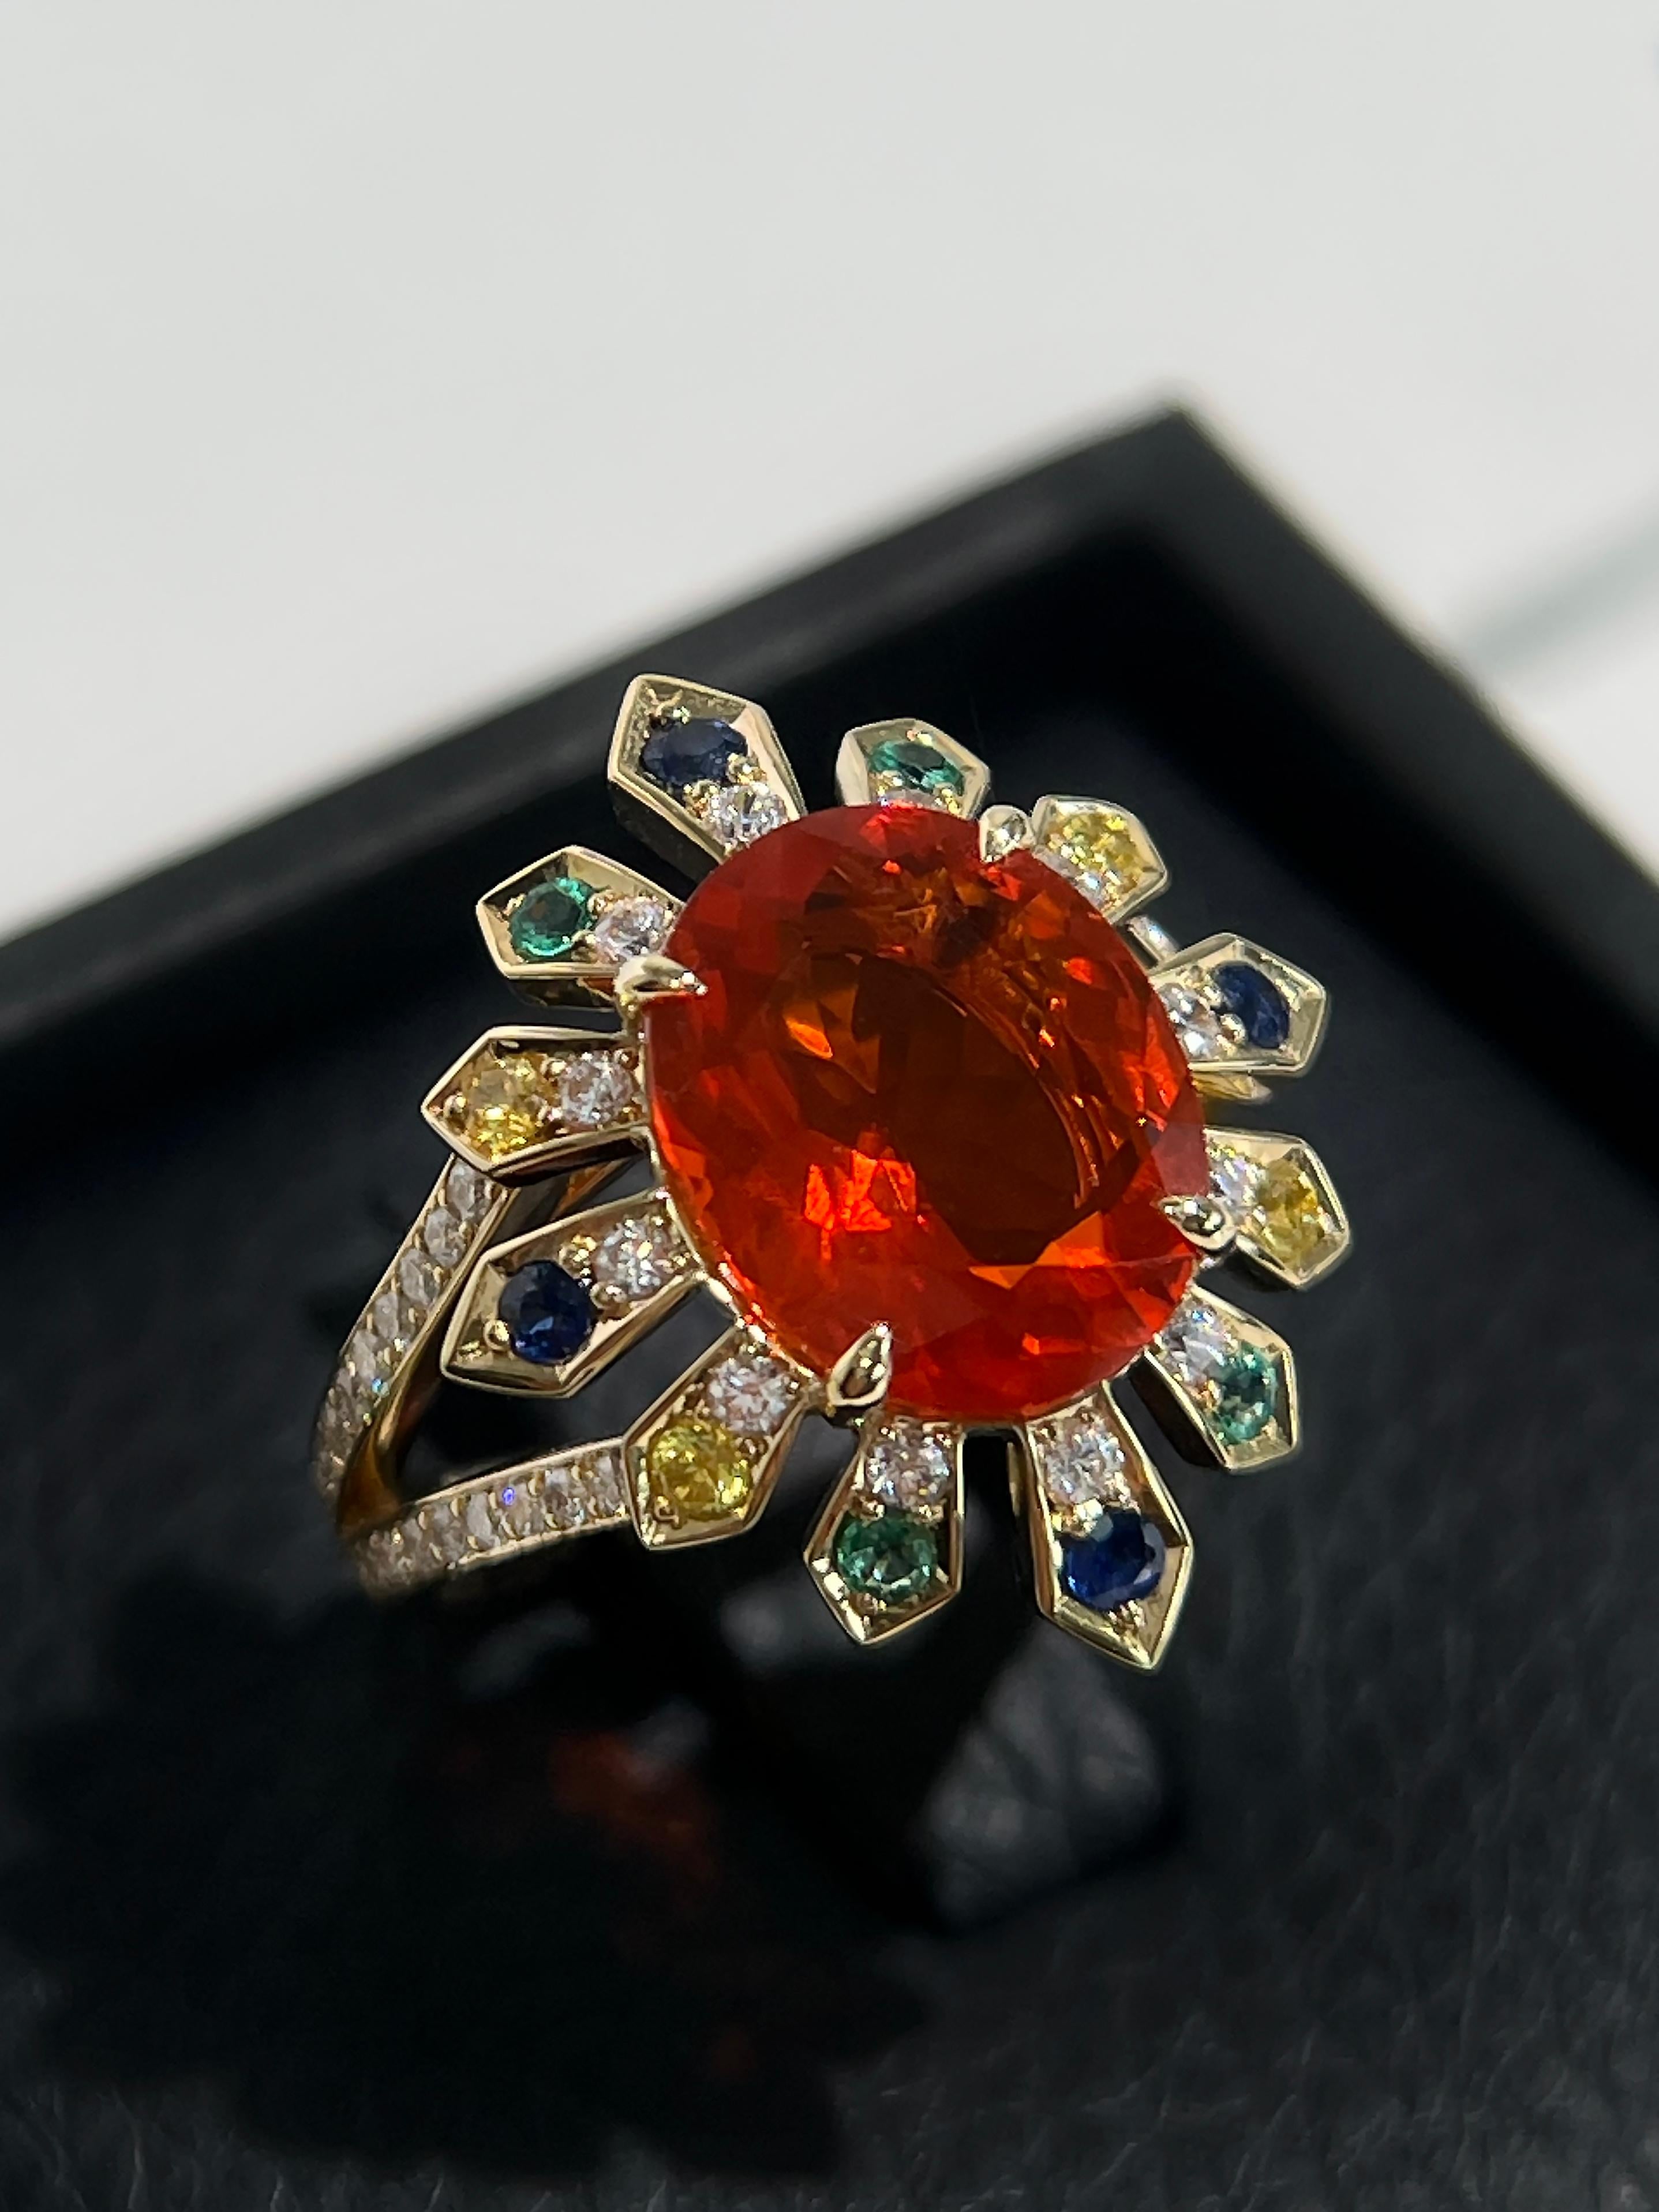 3 Carat Mexican Fire Opal Ring with Sapphires, Emeralds and Diamonds in 18k Gold 1